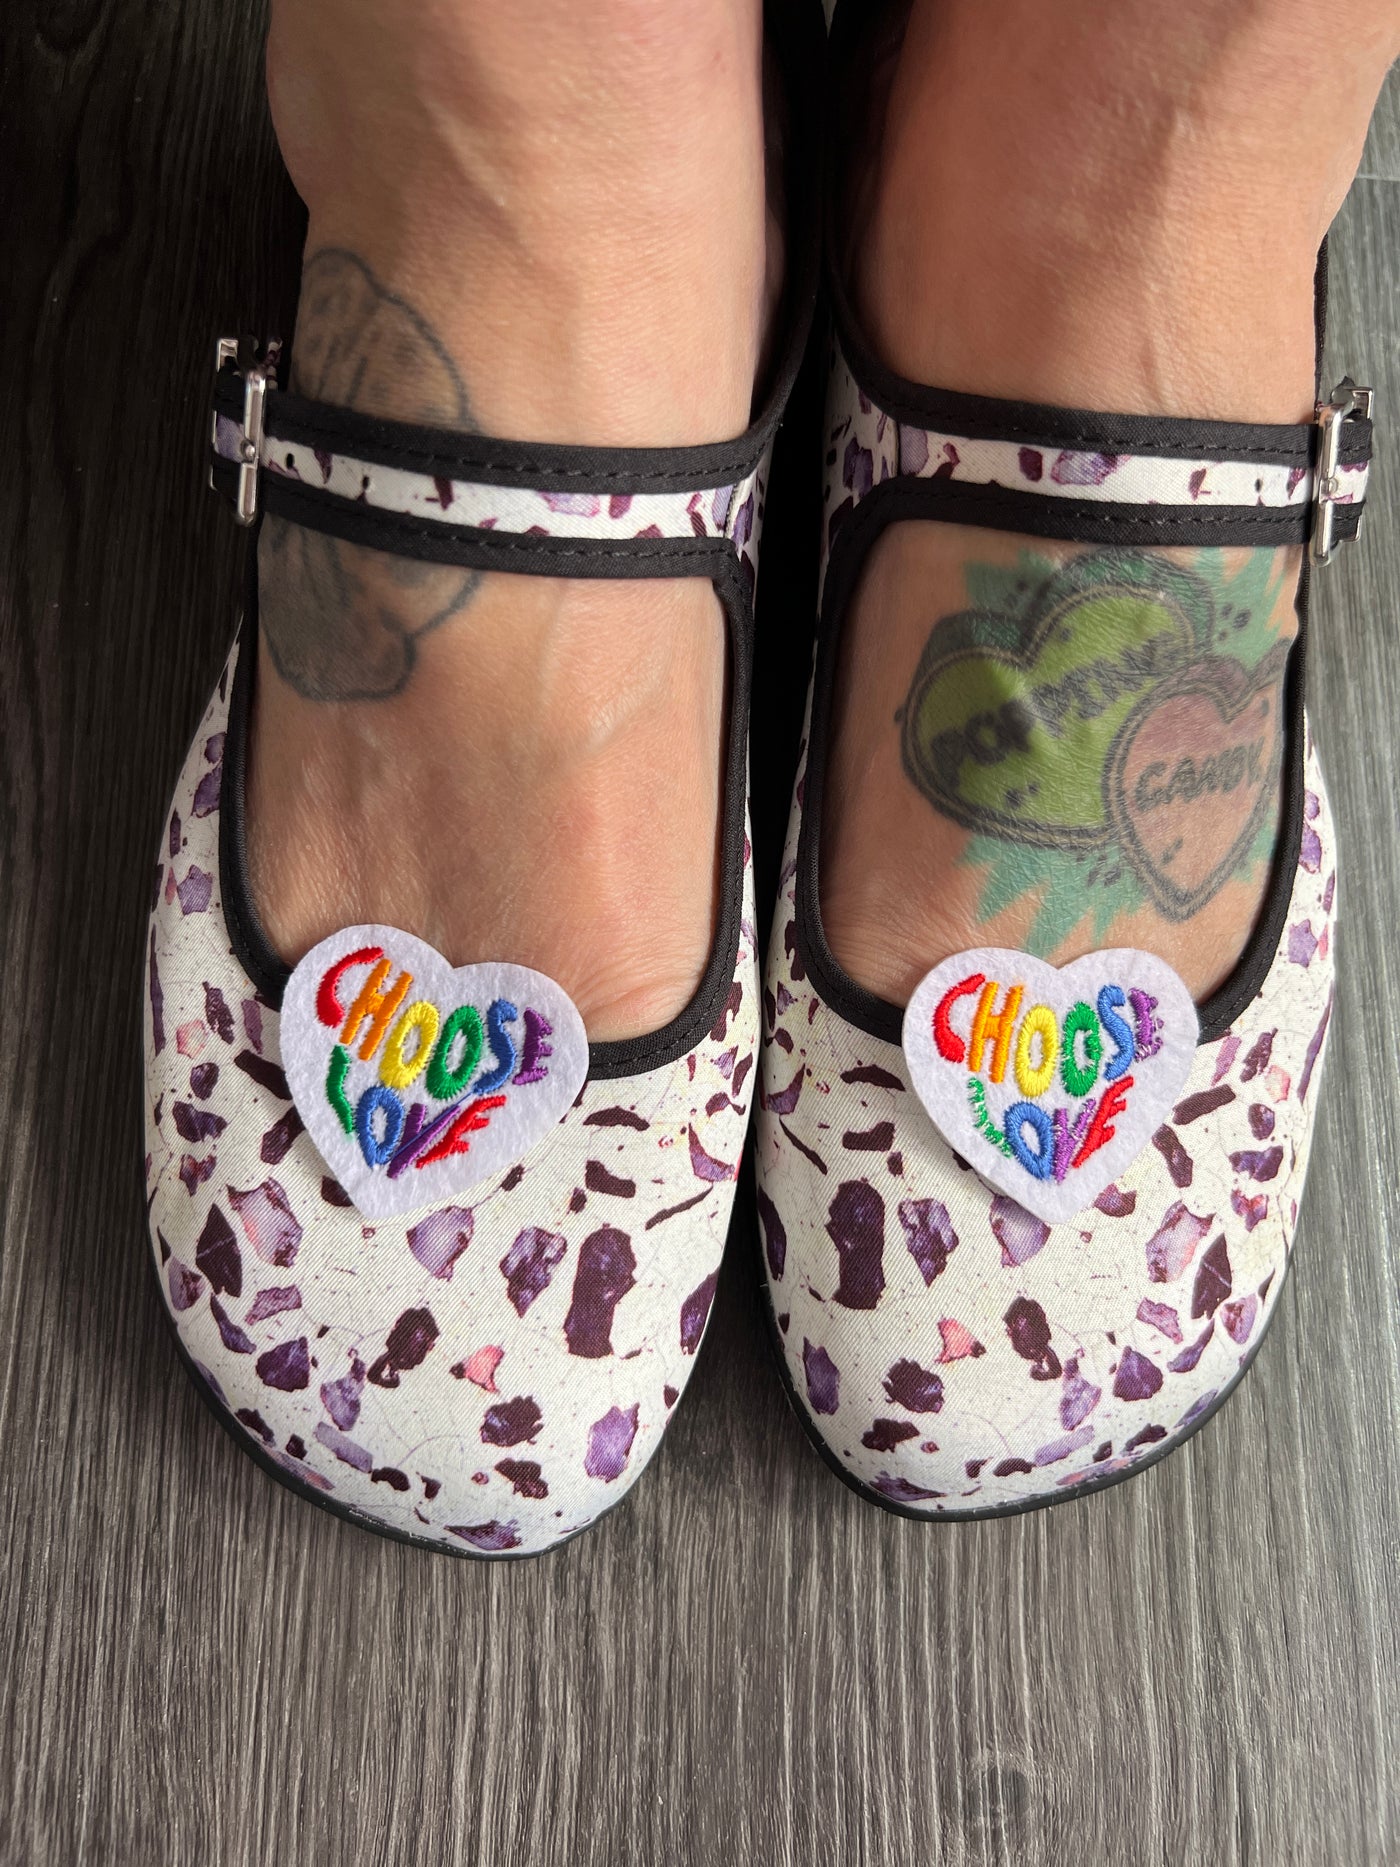 Popping Candy Shoe Clips - Choose Love